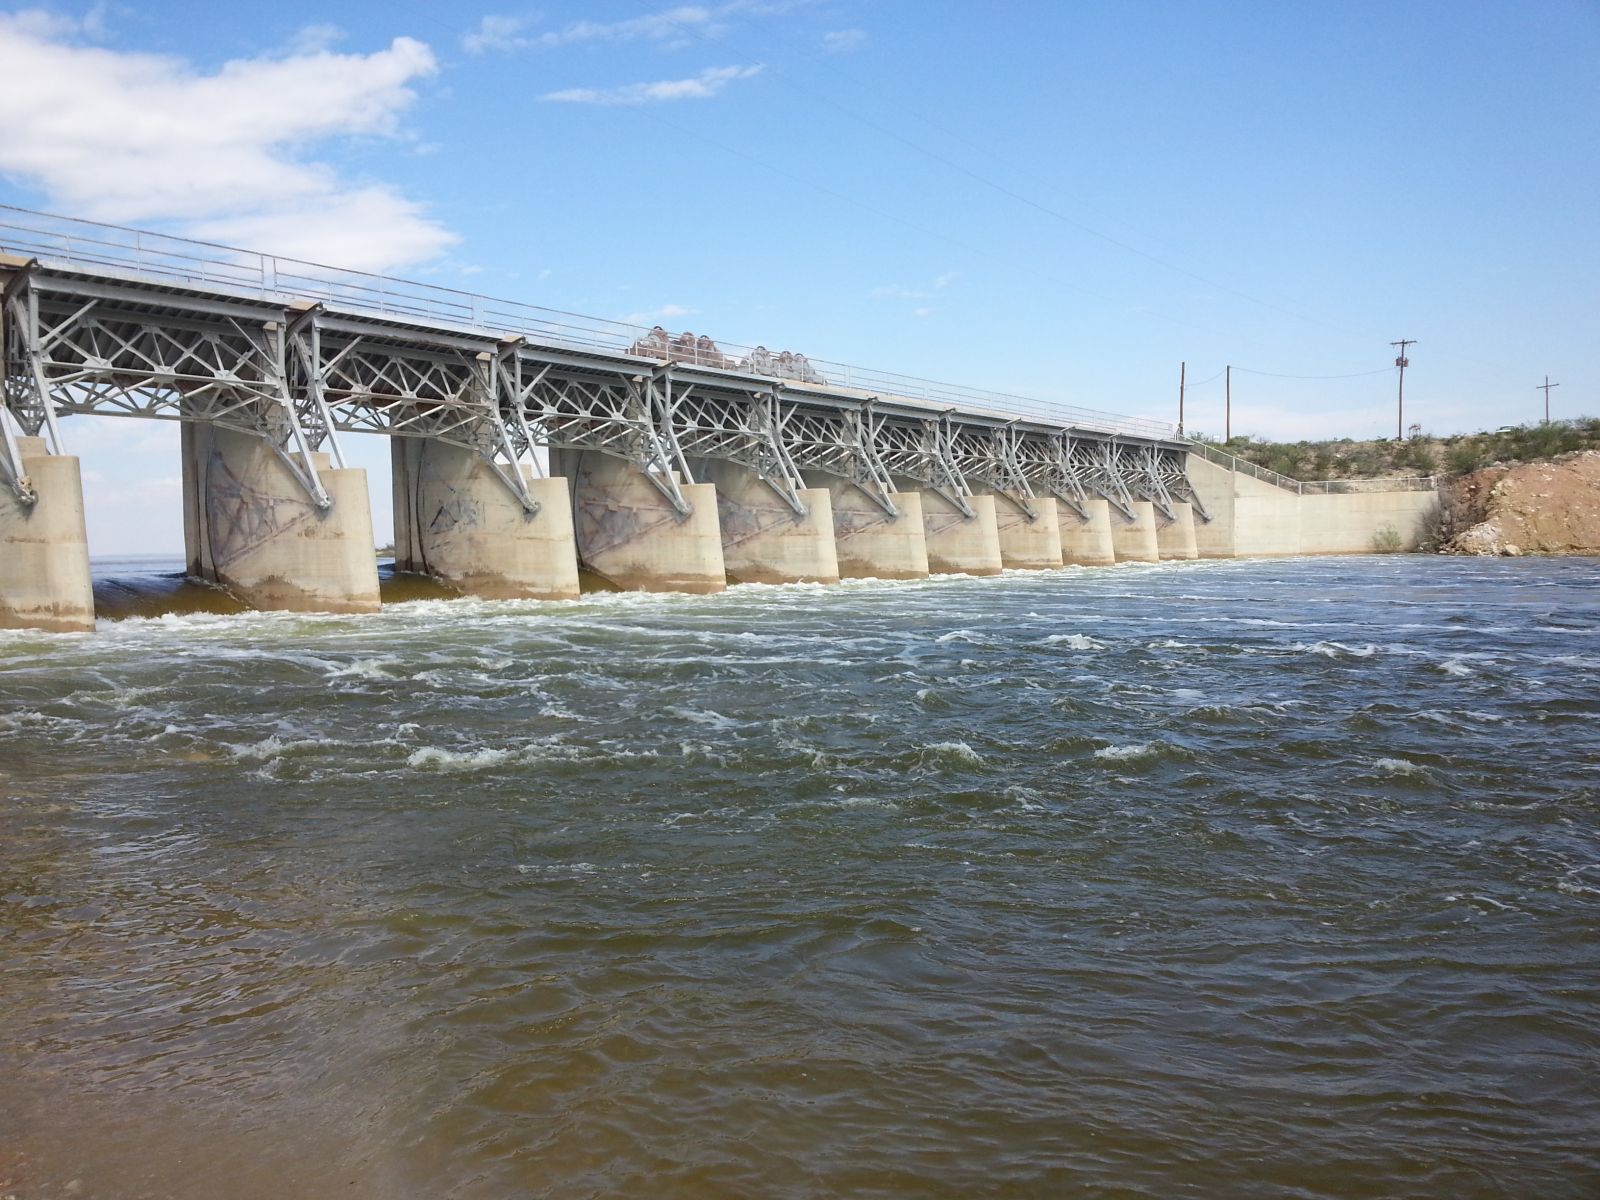 Water spilling out of Red Bluff Reservoir on September 24, 2014. The reservoir is located on the Pecos River southeast of Carlsbad and east of Guadalupe Mountain National Park. 